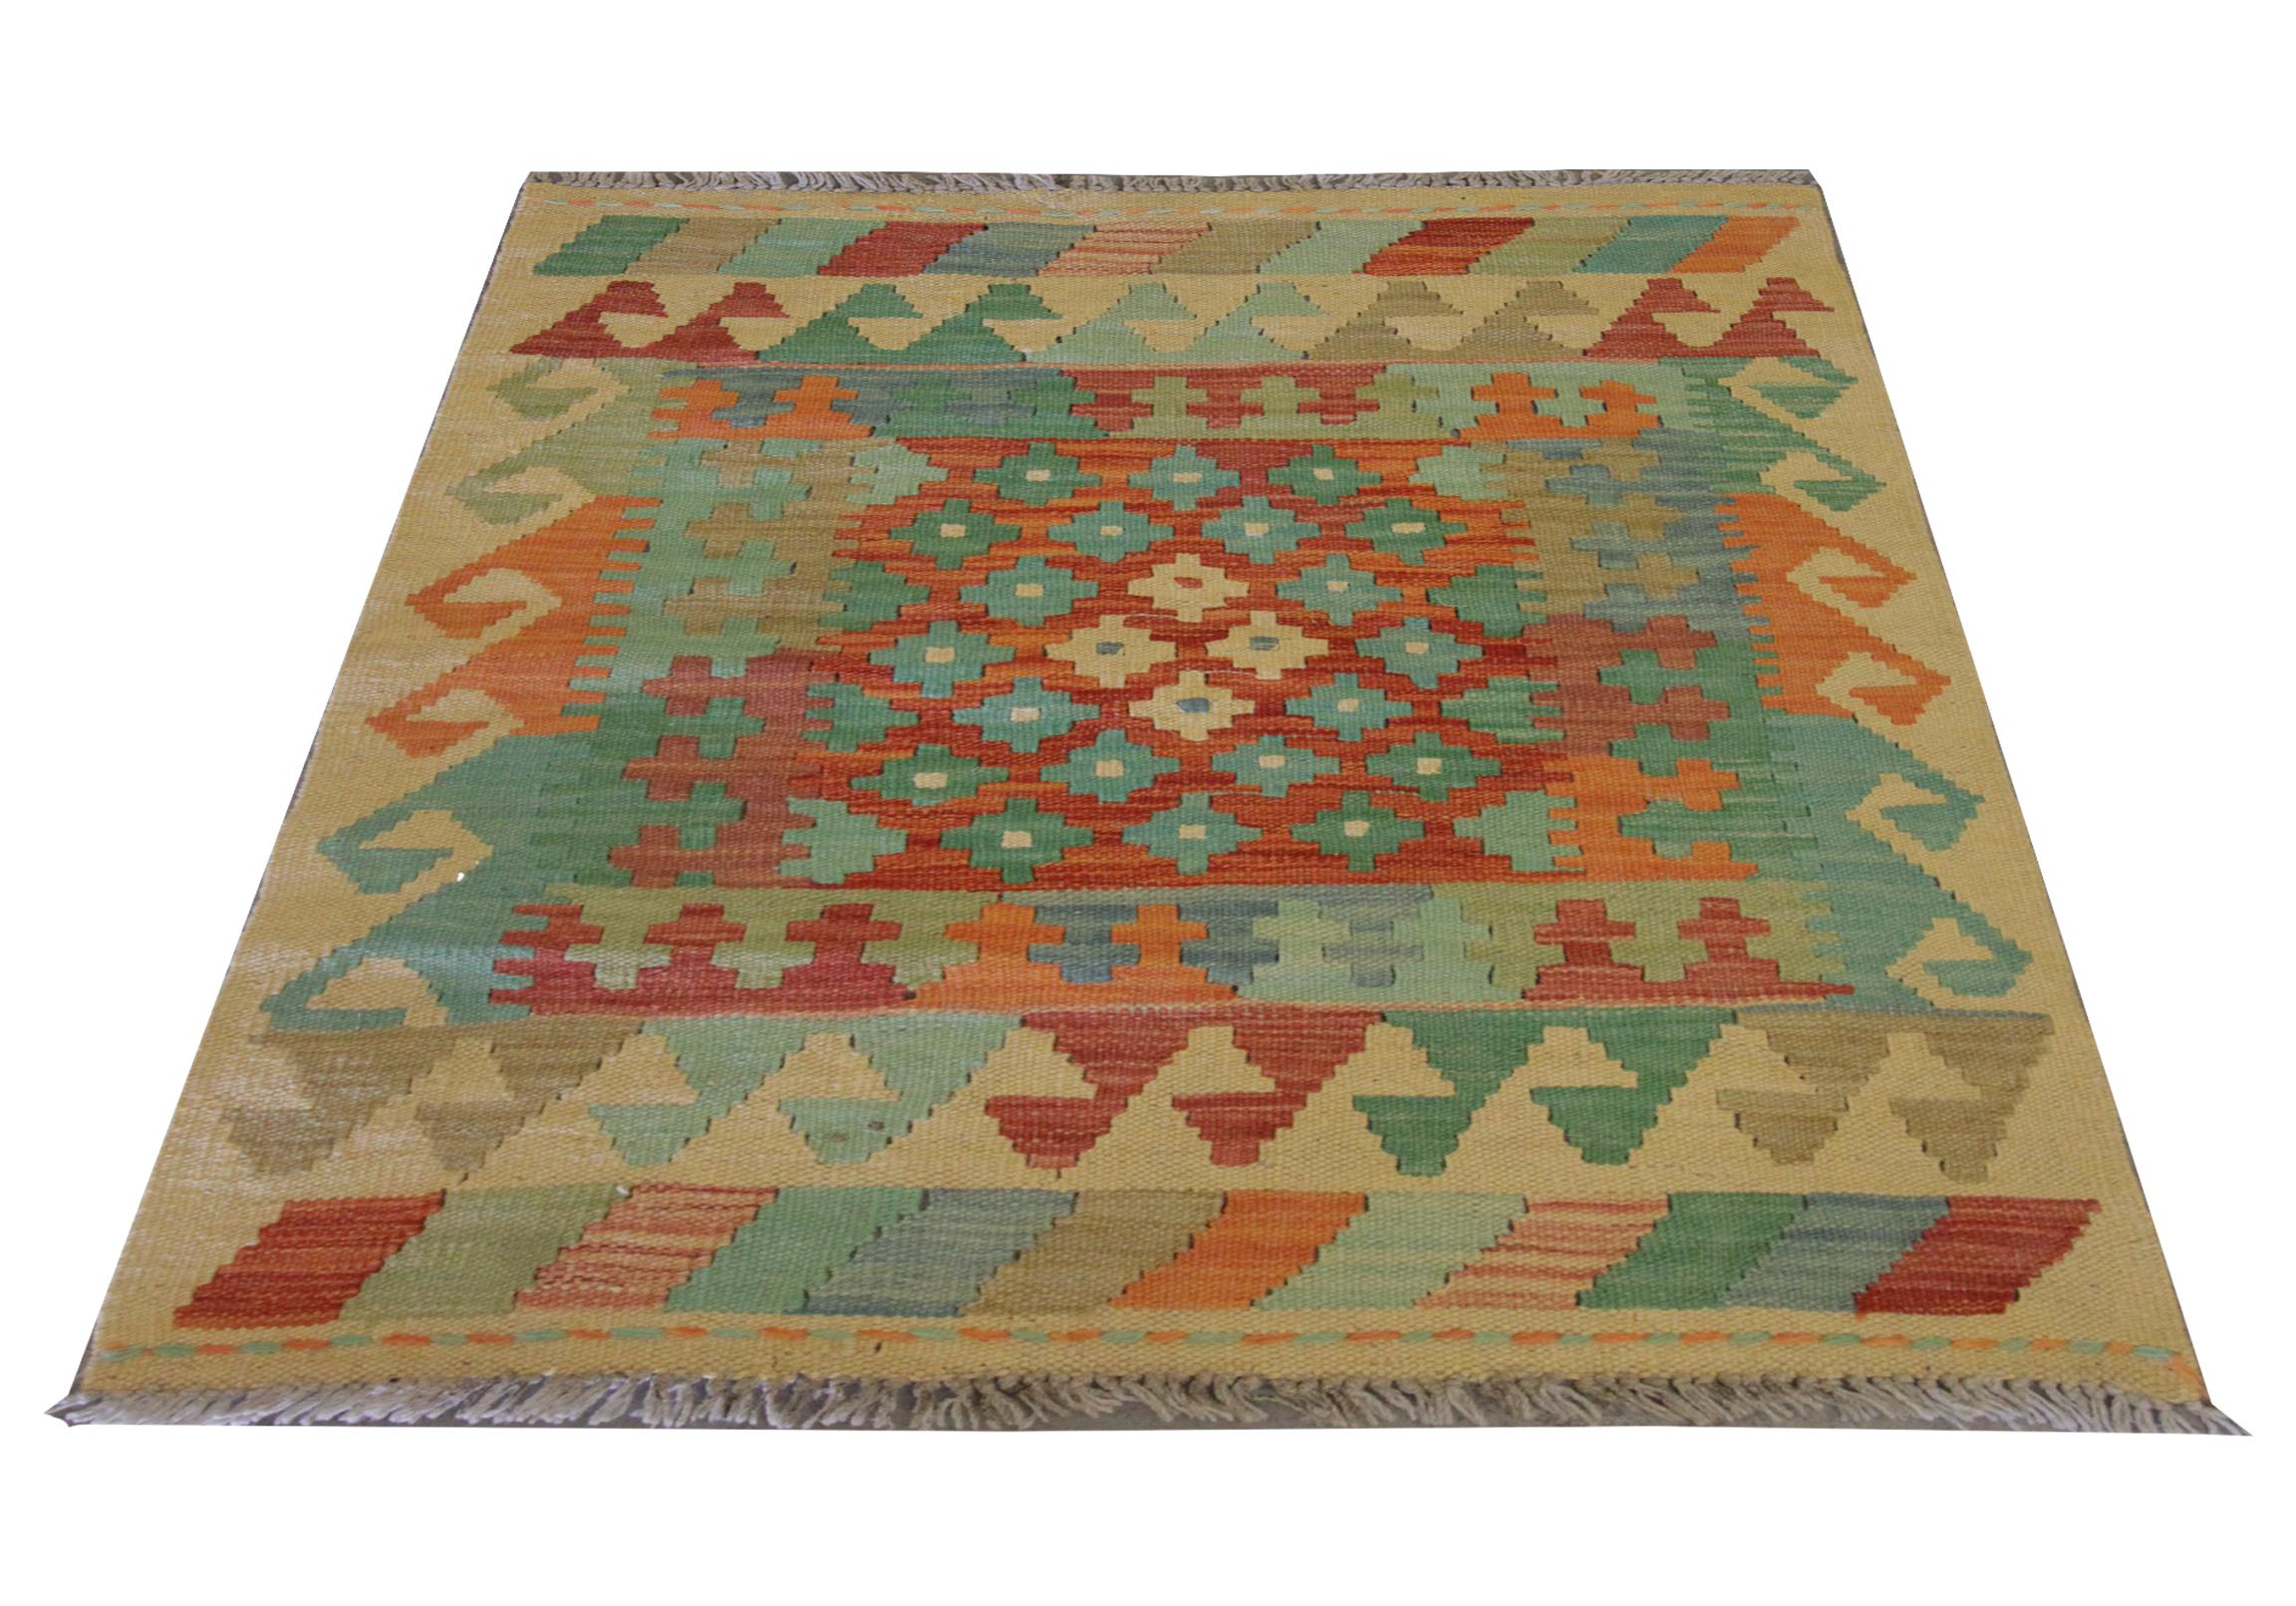 This small kilim rug is a new traditional Afghan kilim woven by hand in the early 21st century. The design features a bold geometric pattern with a layered border woven in green, orange and cream colours. The colour palette and design featured in